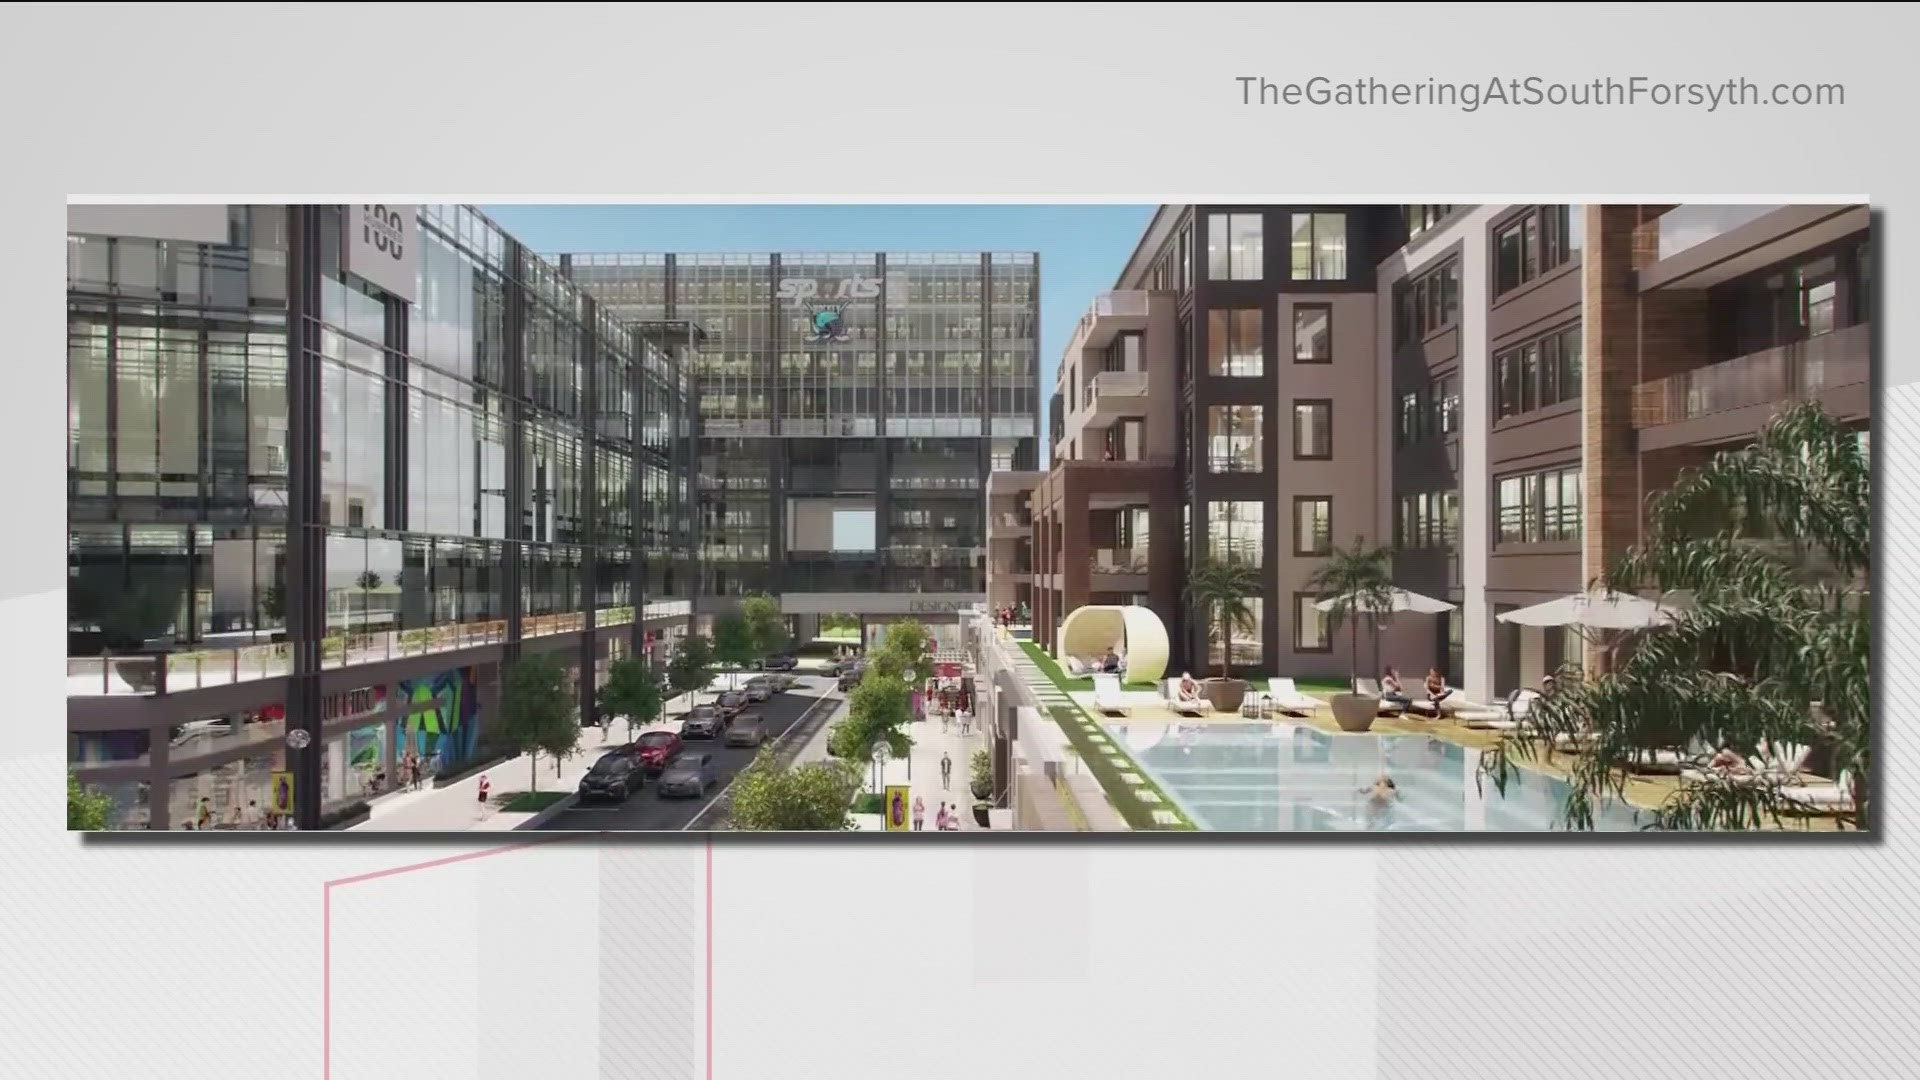 ​Developers of The Gathering at South Forsyth said they are "re-evaluating" the project based on last-minute changes that were made by commissioners.